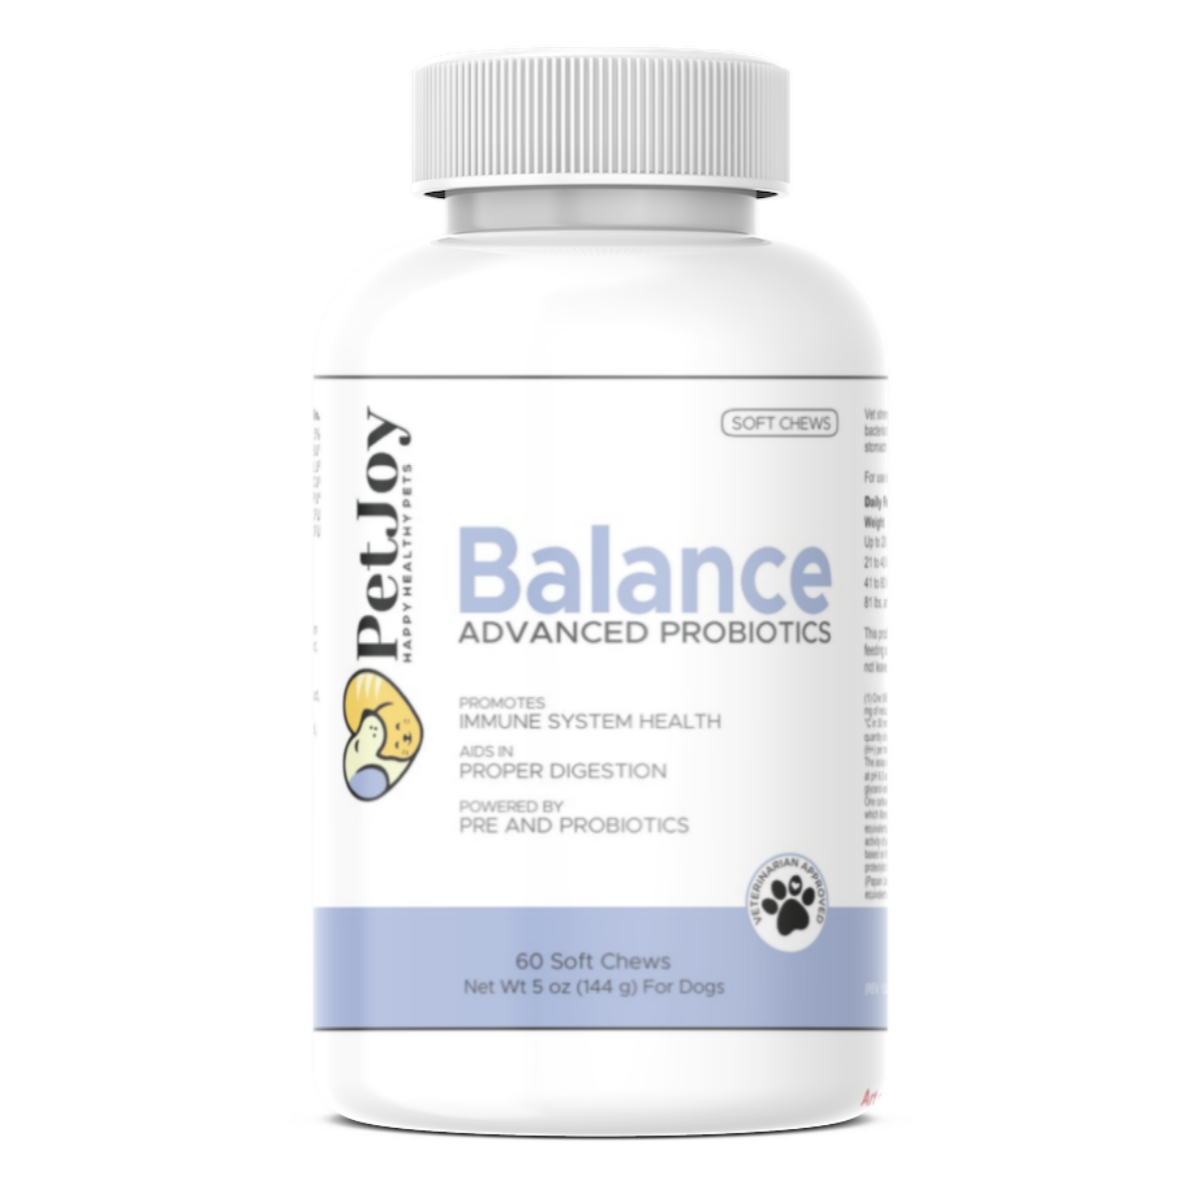 Balance Daily Soft Chew Advanced Probiotic (60 Count)